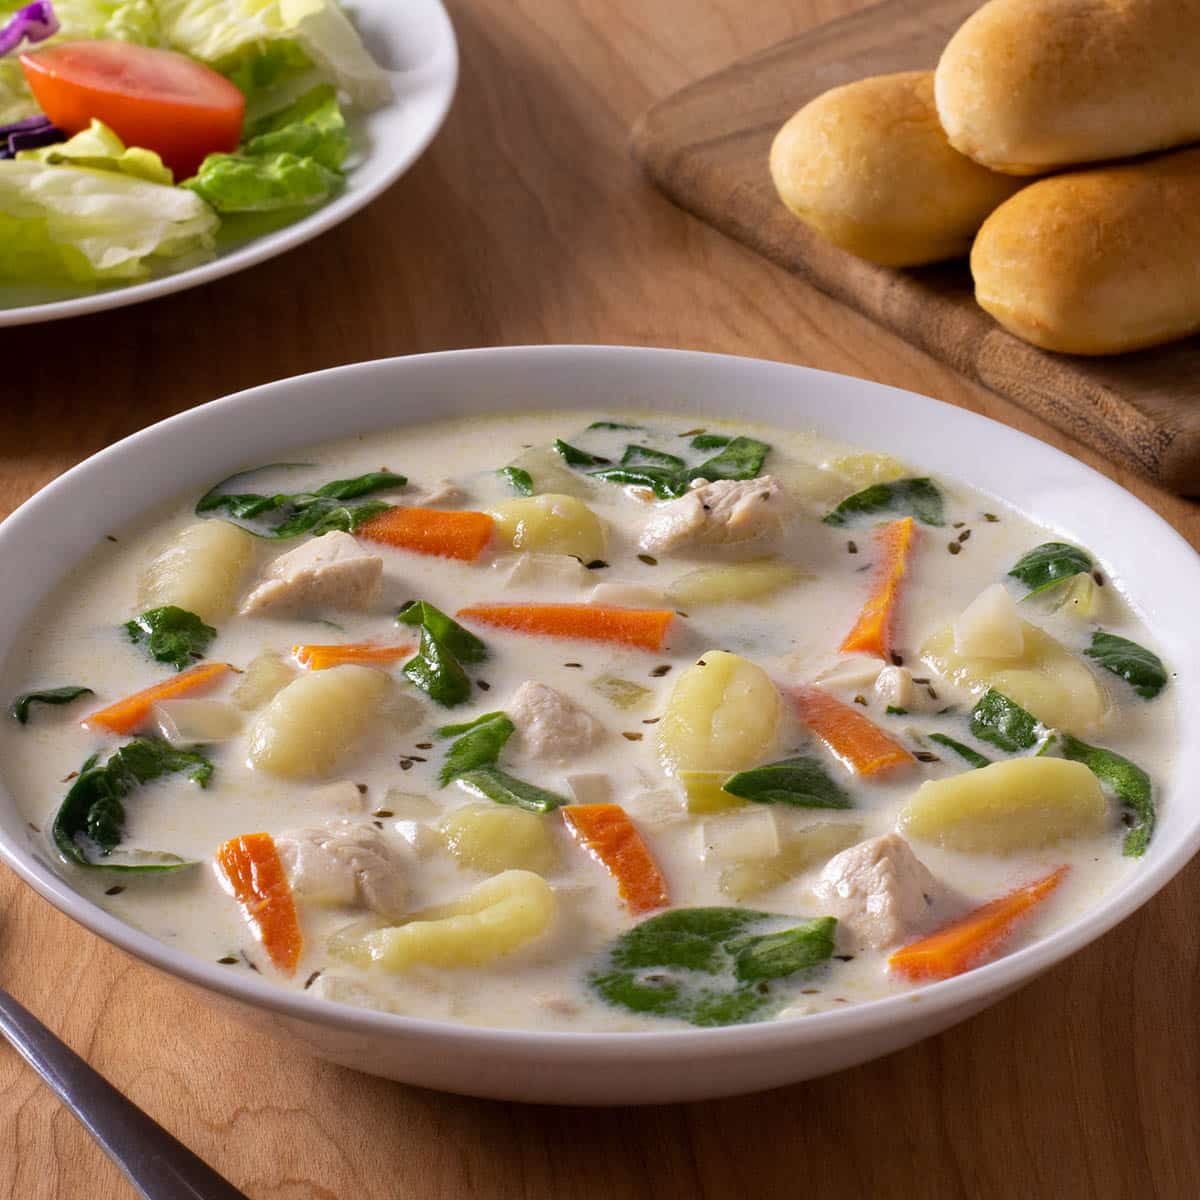 Bowl of chicken gnocchi soup with salad and breadsticks in background.